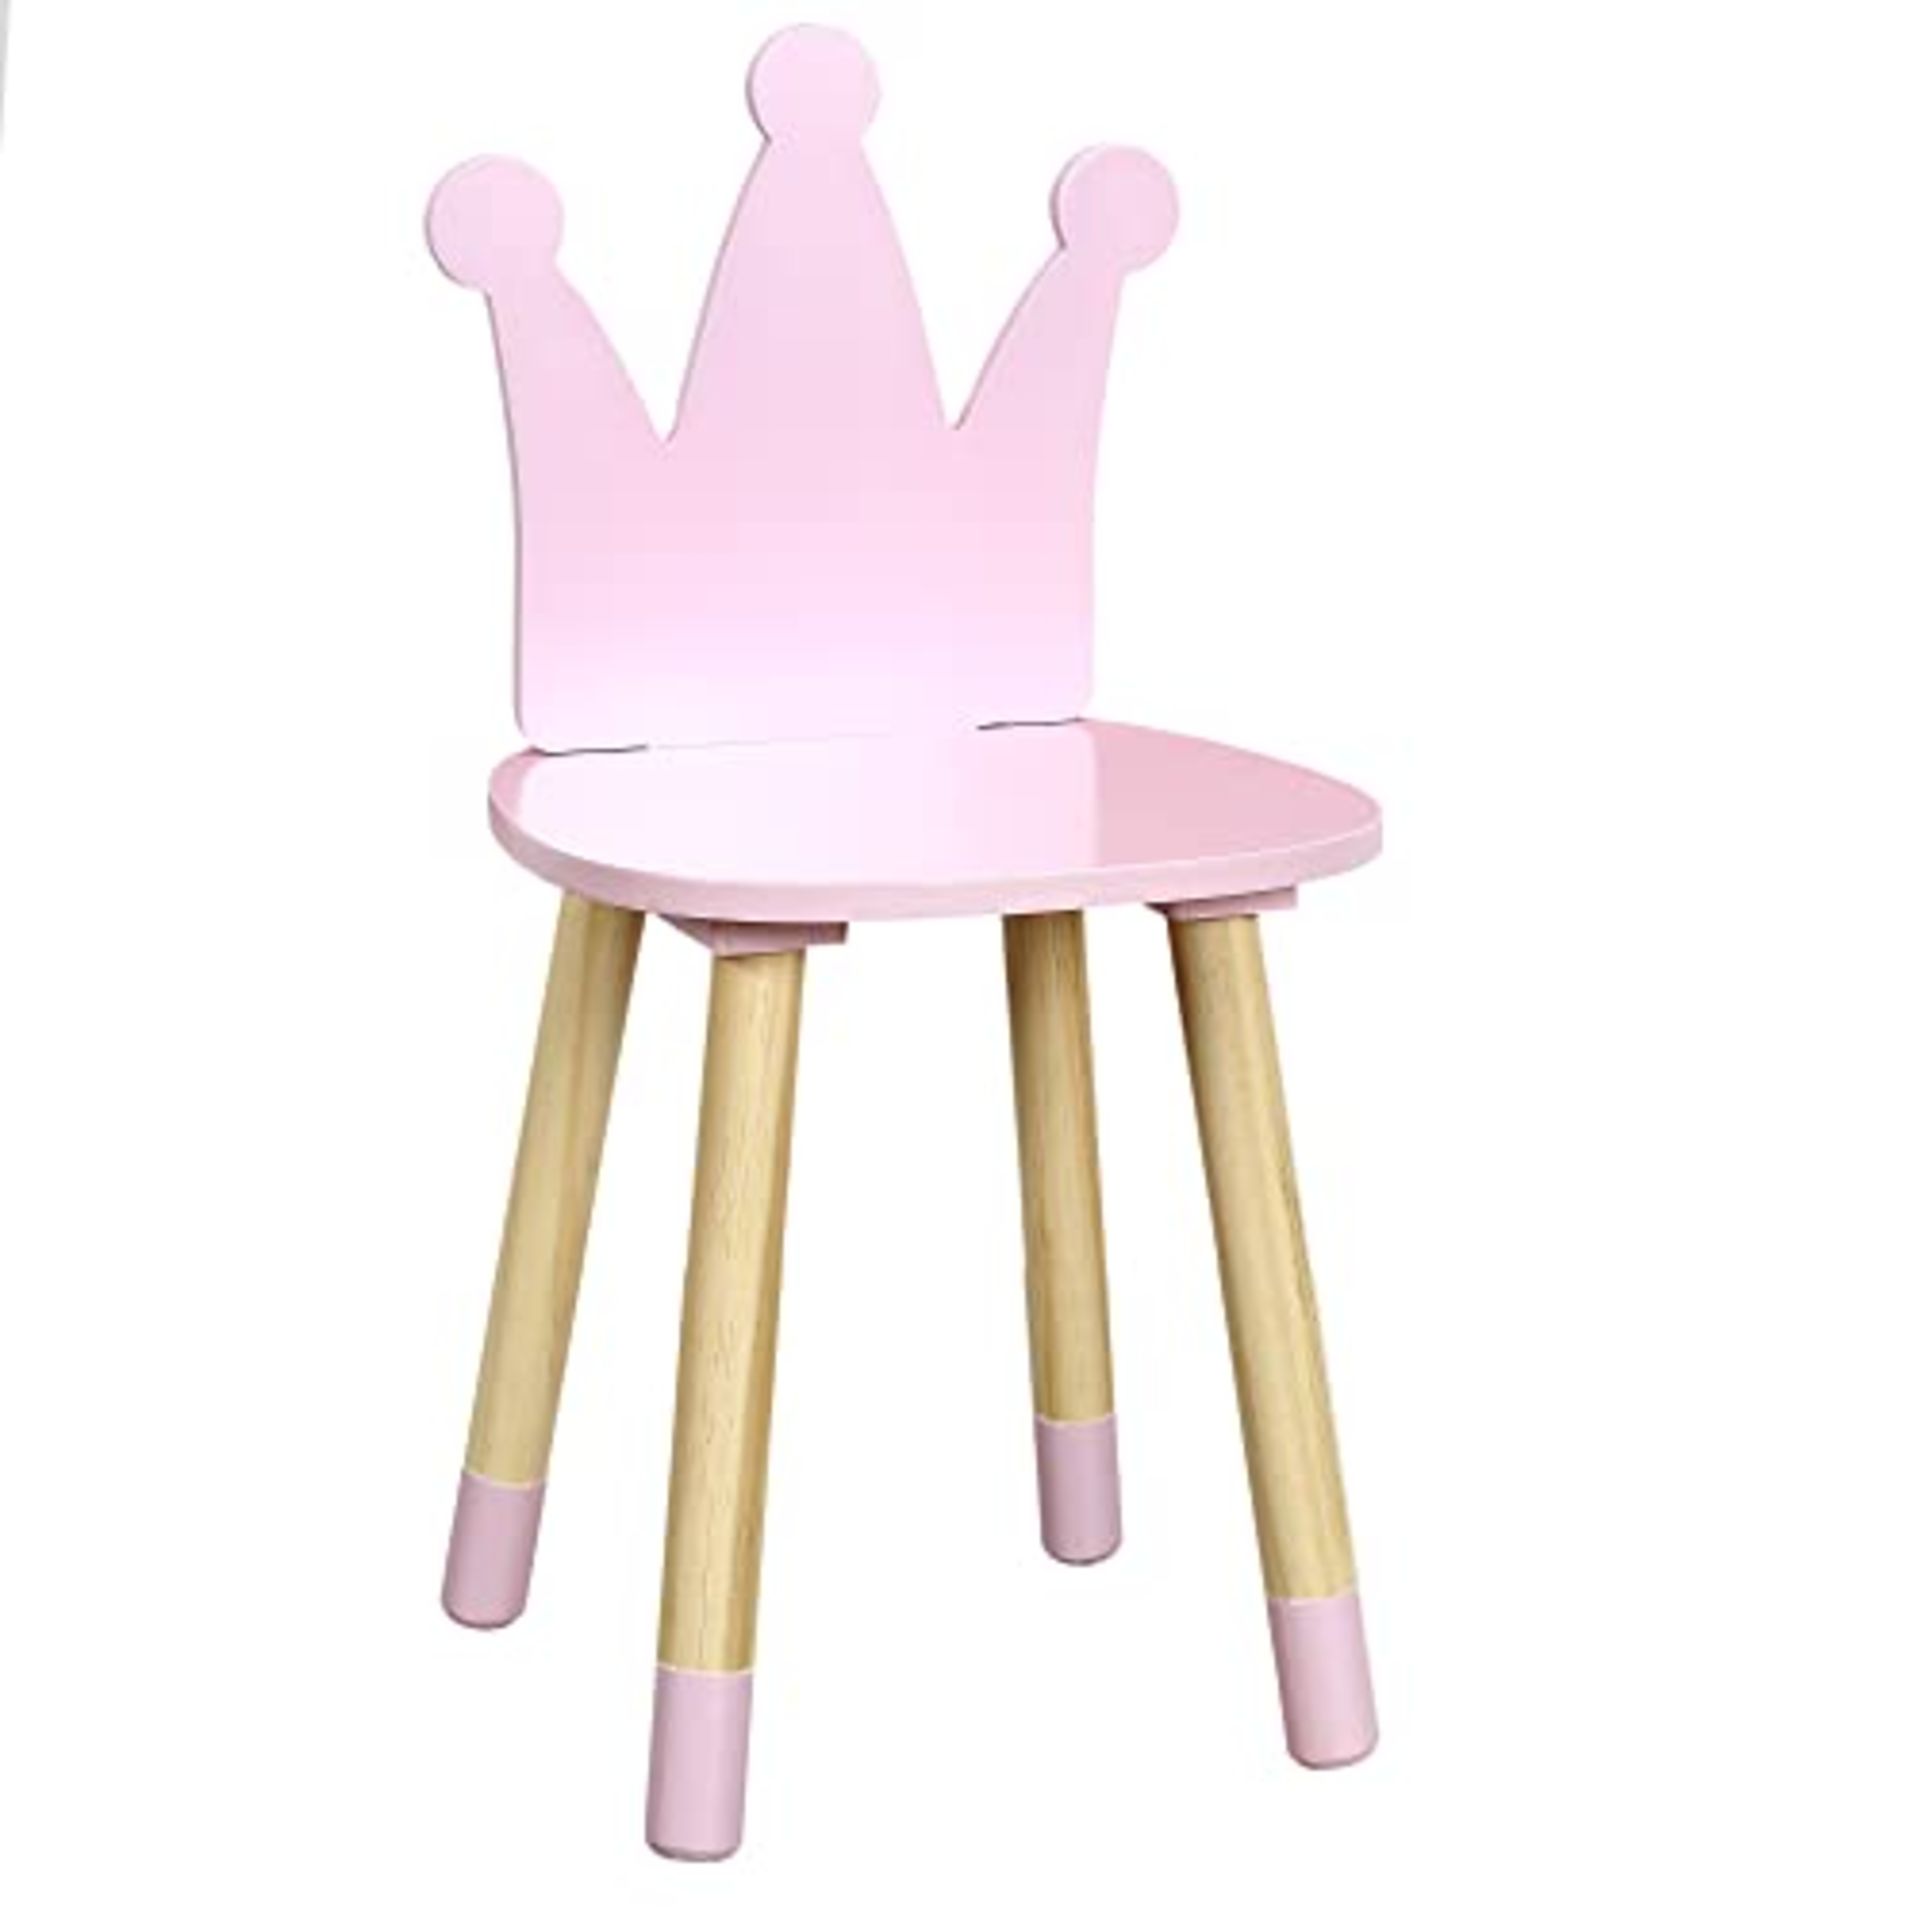 HOME DECO KIDS HD6922 Crown Pink Child Chair Bedroom Furniture Decoration, Wood-PIN, 2